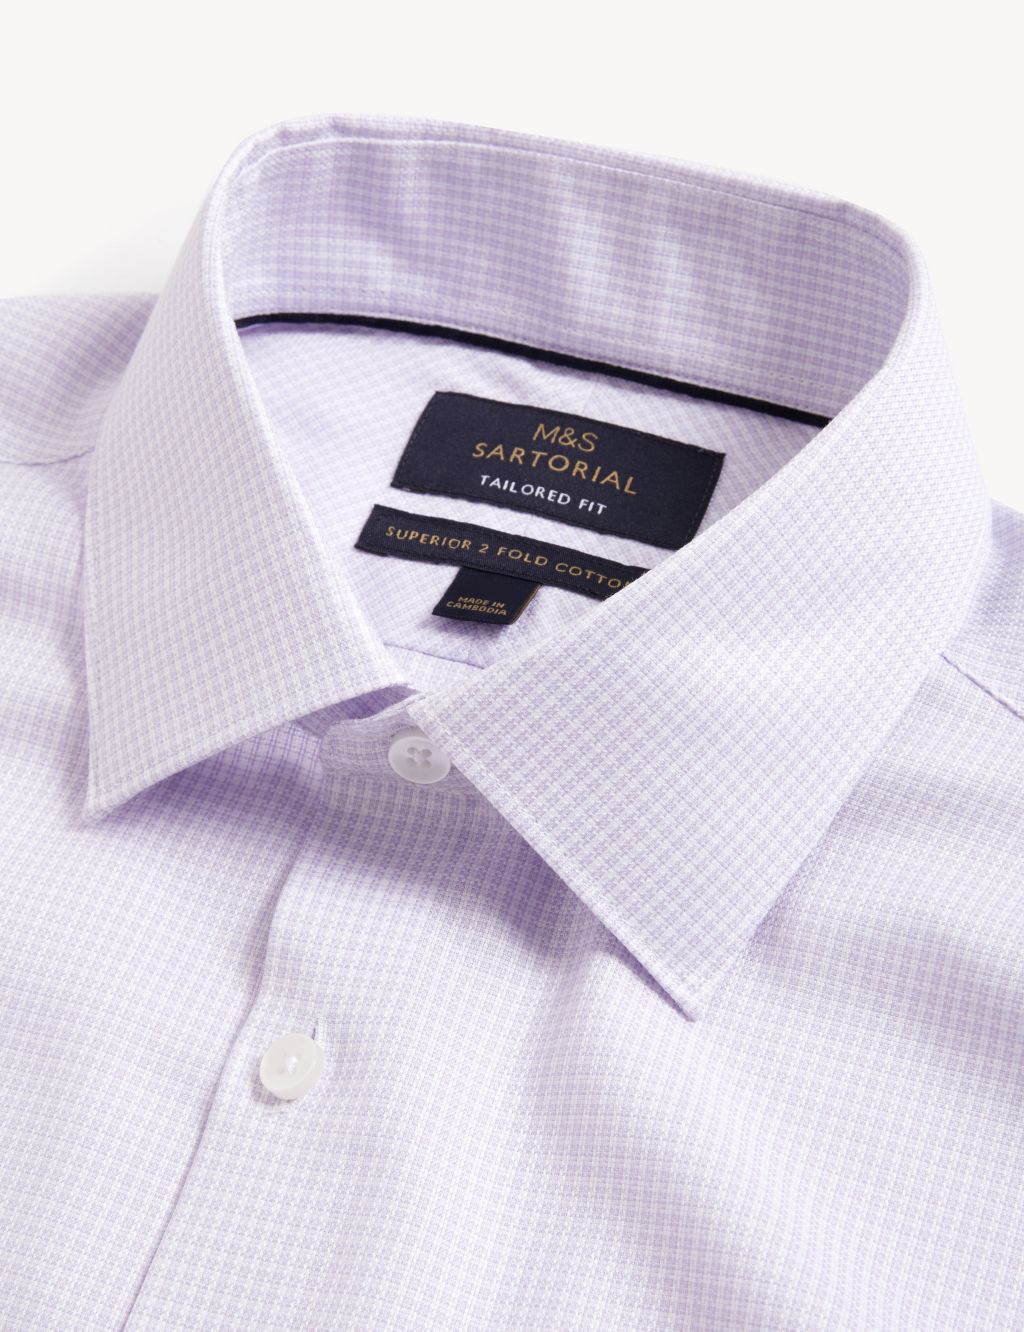 Tailored Fit Pure Cotton Puppytooth Shirt image 7